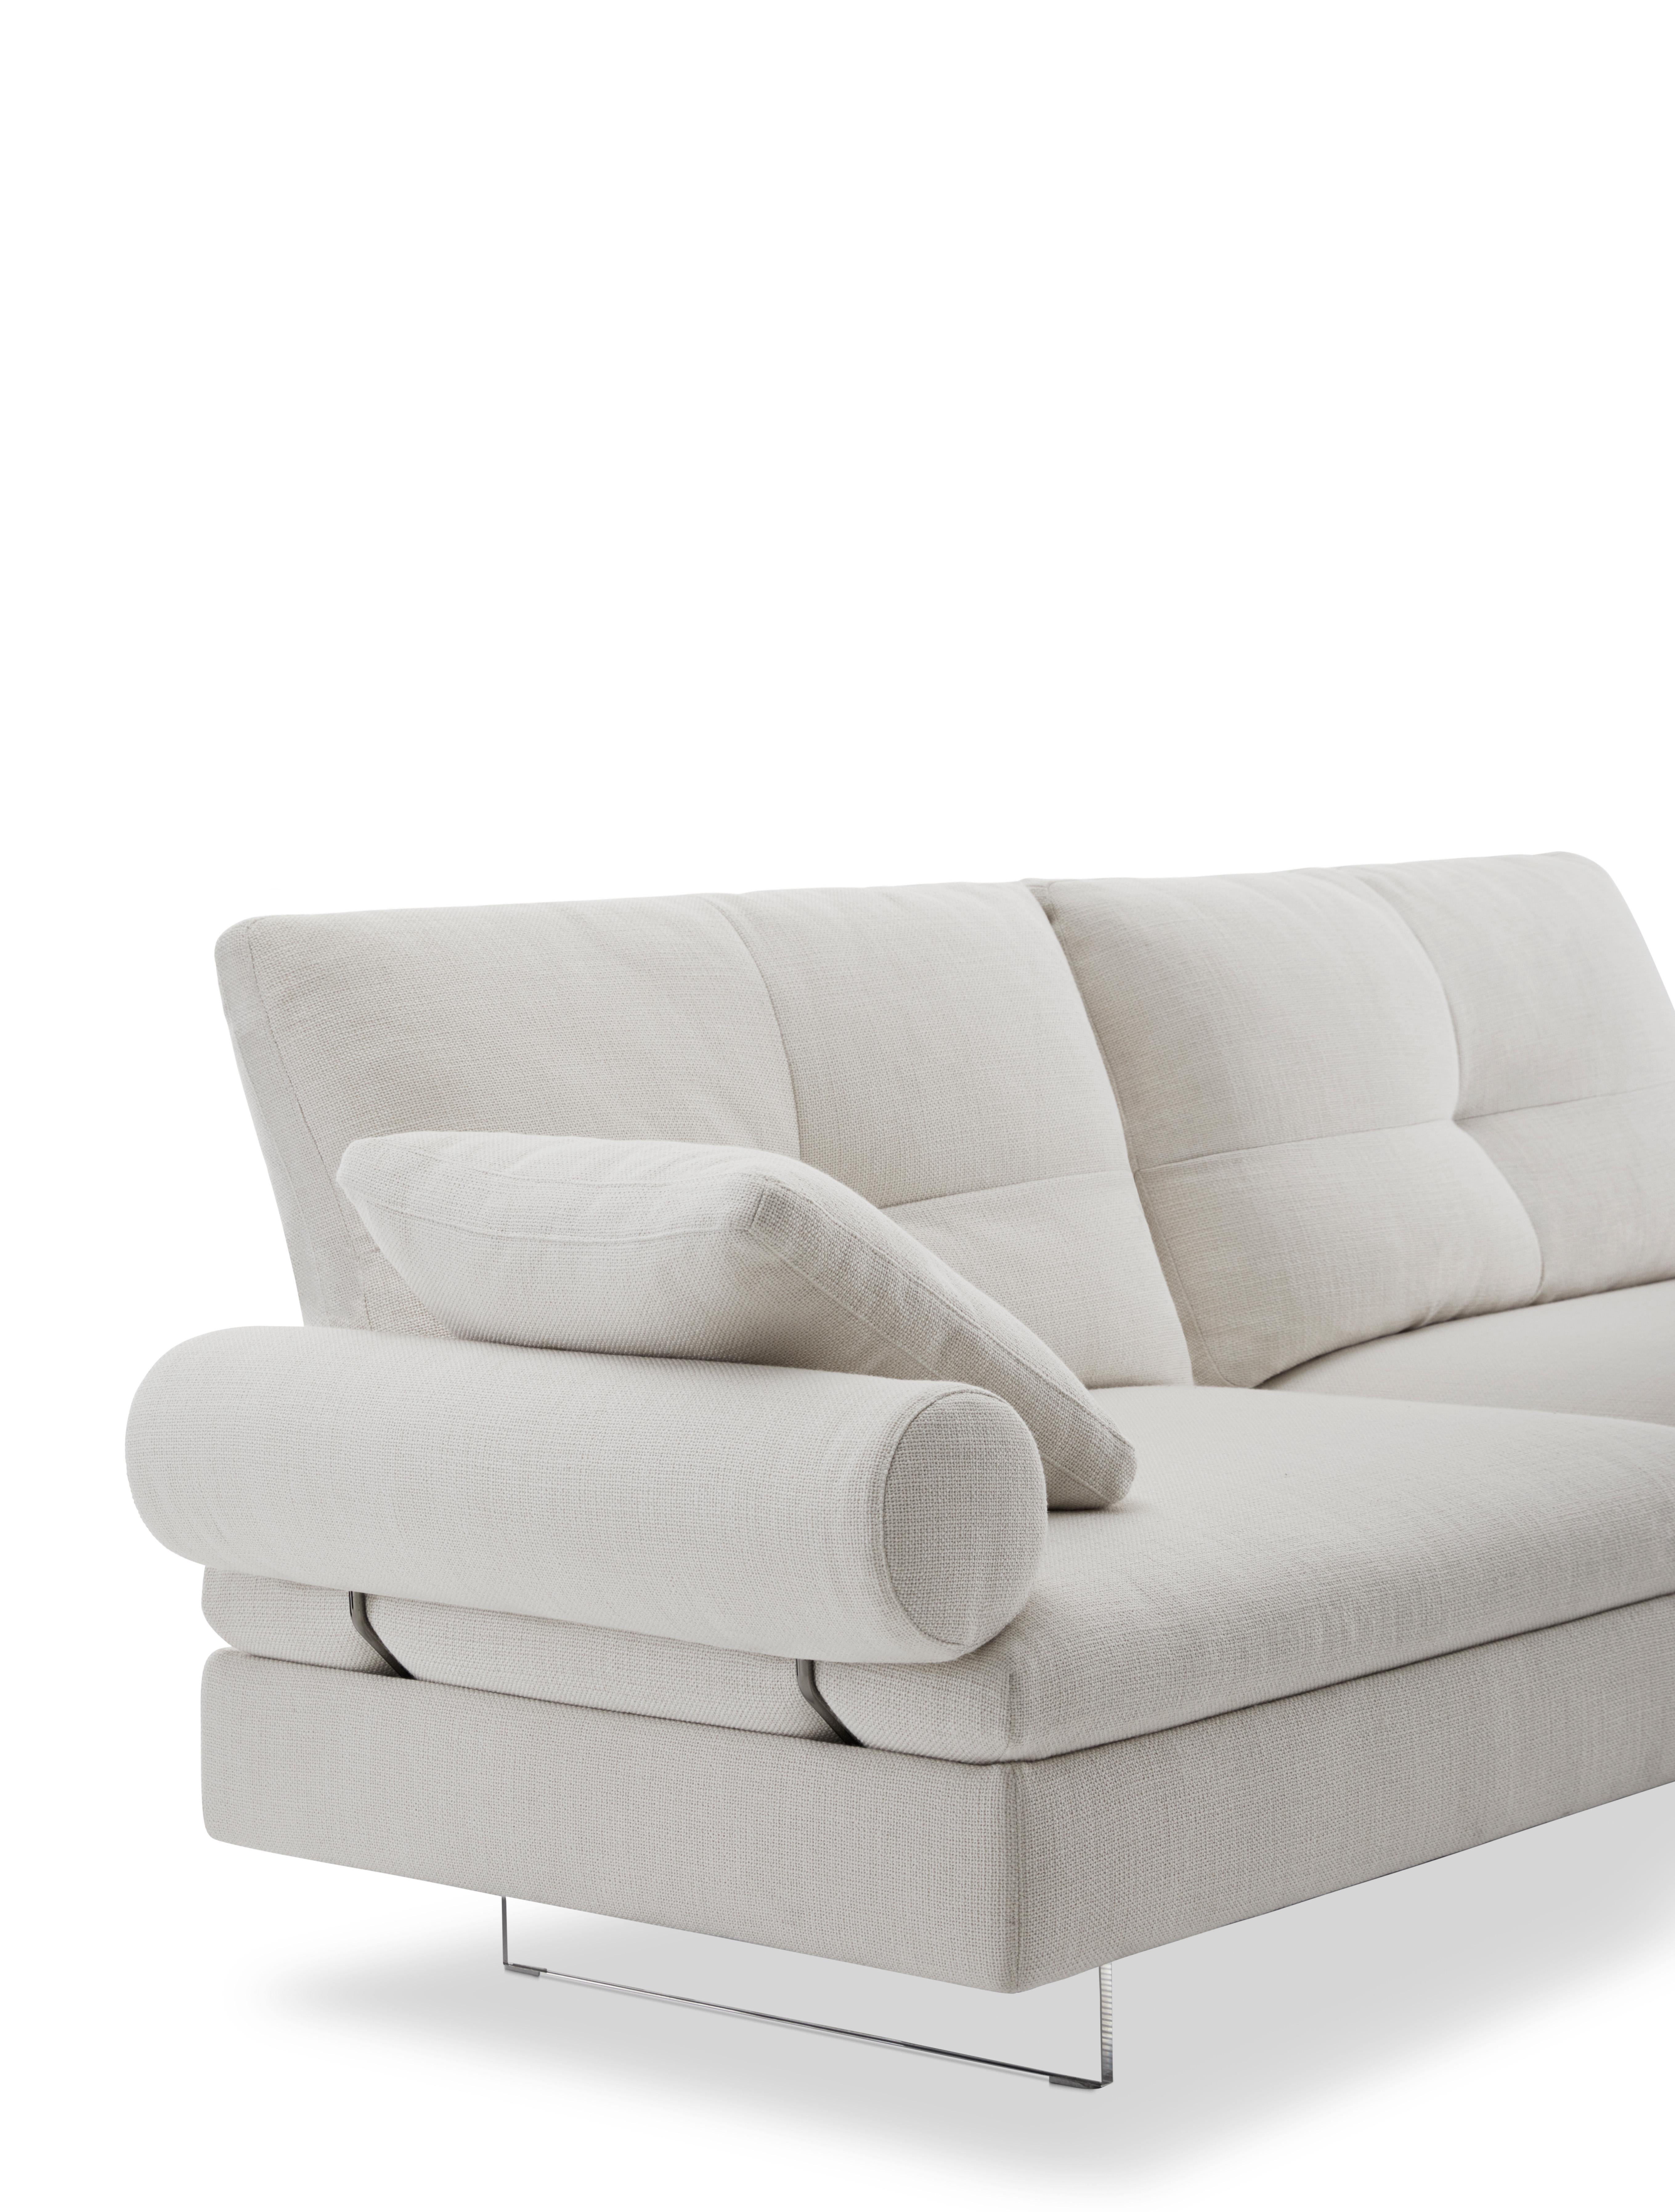 Modern Limes New 80 Medium Sofa in Beige Upholstery with Roll Armrest by Sergio Bicego For Sale